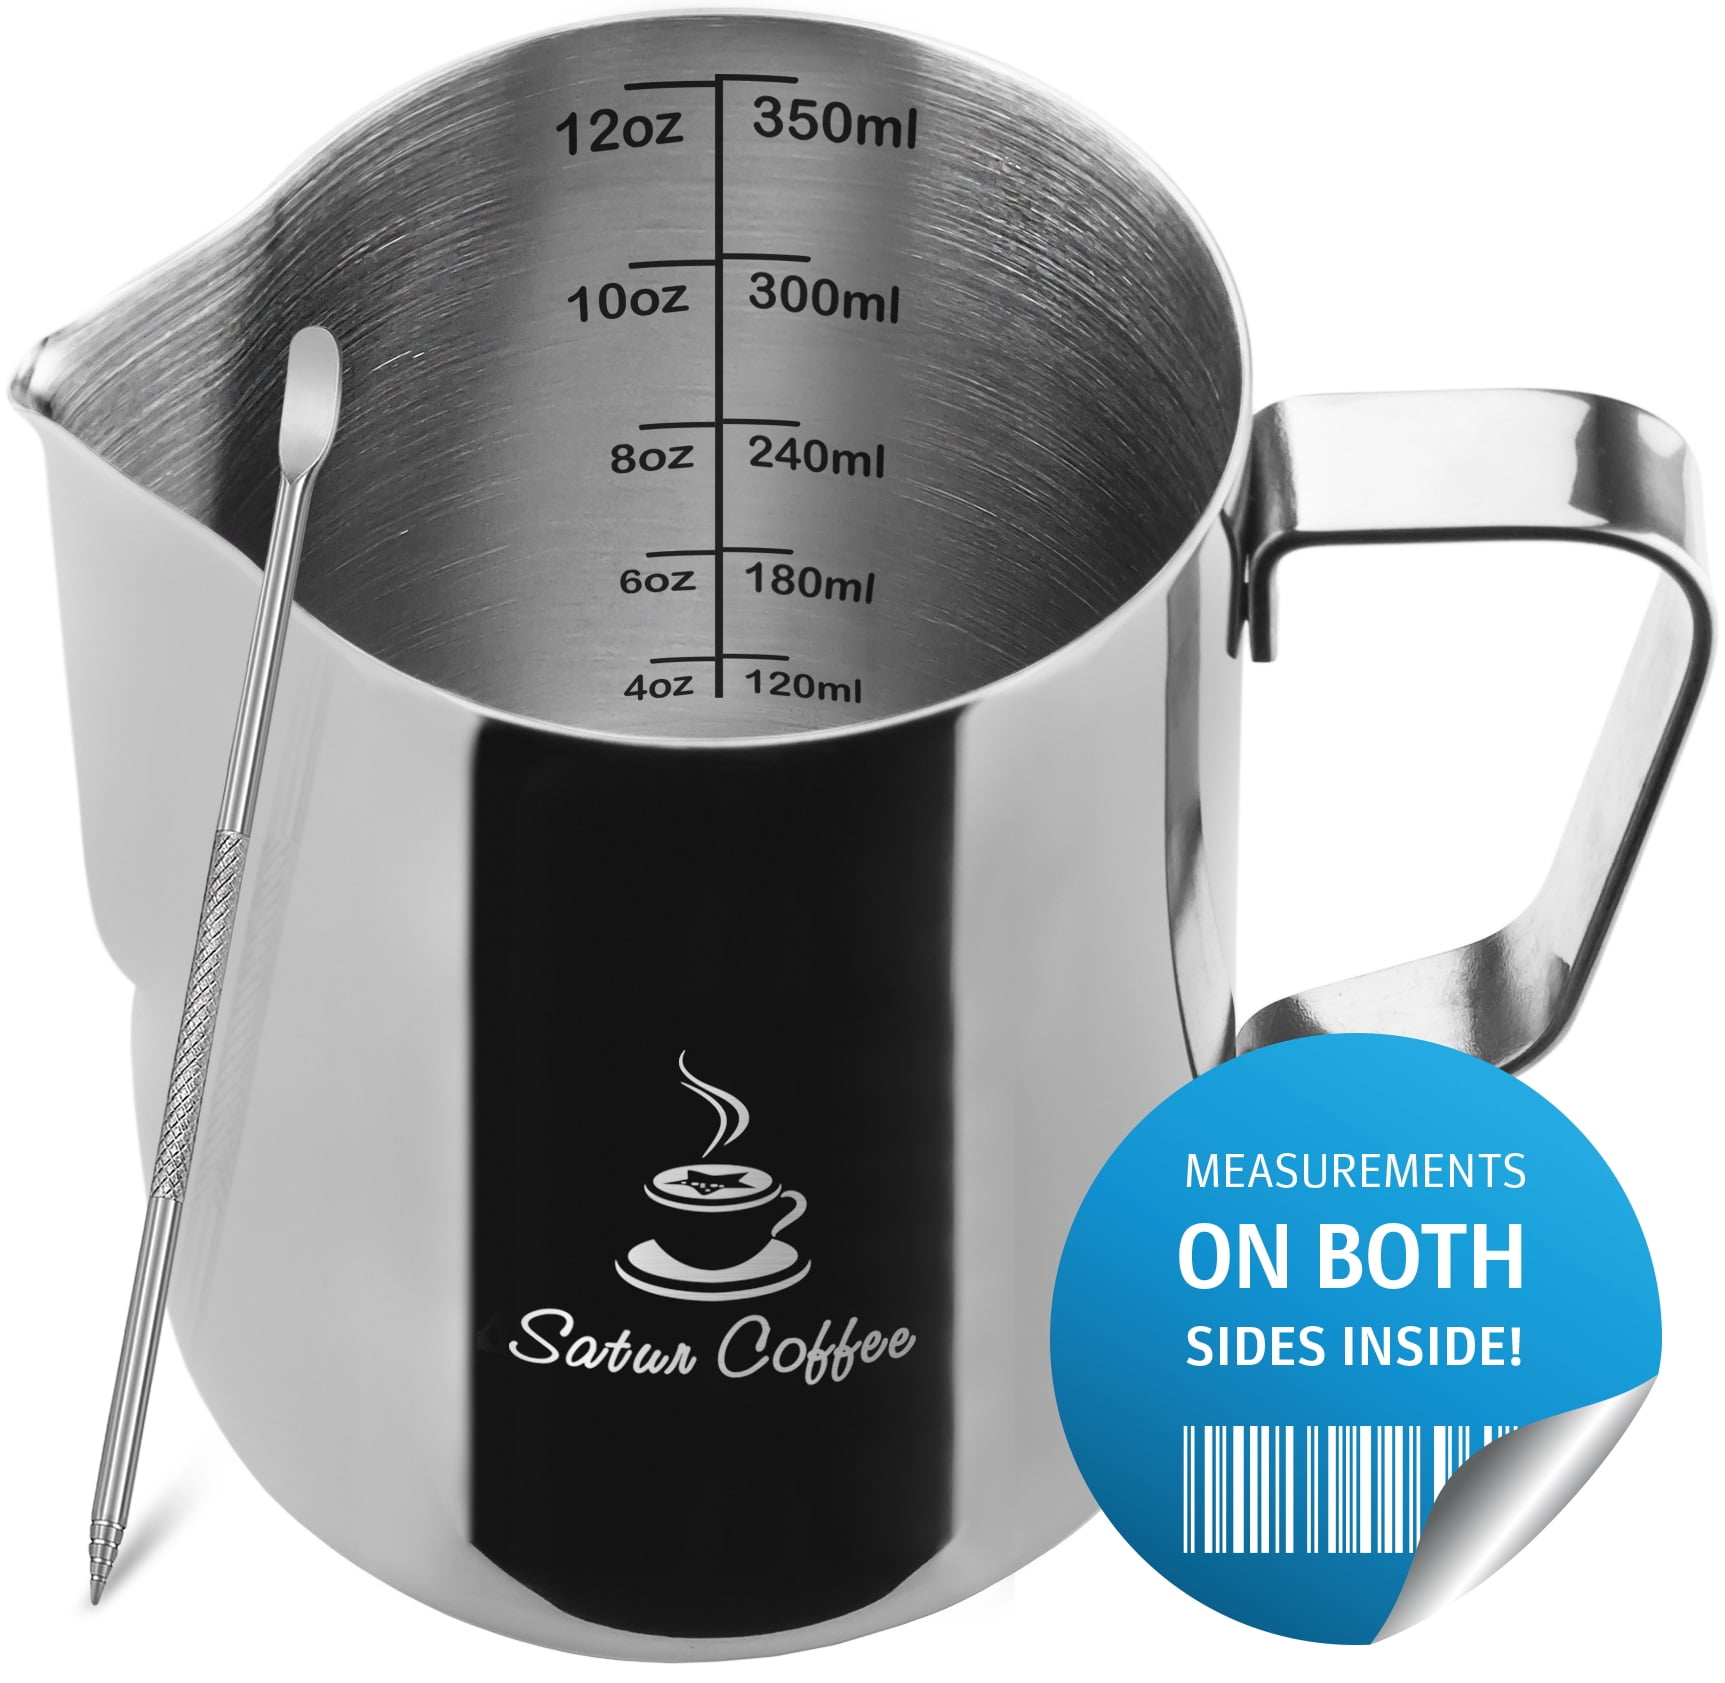 GOWA Coffee Milk Frothing Pitcher Cup with Measurement Inside Thermometer Set 12oz/350ml Stainless Steel Steaming Pitcher Tool for